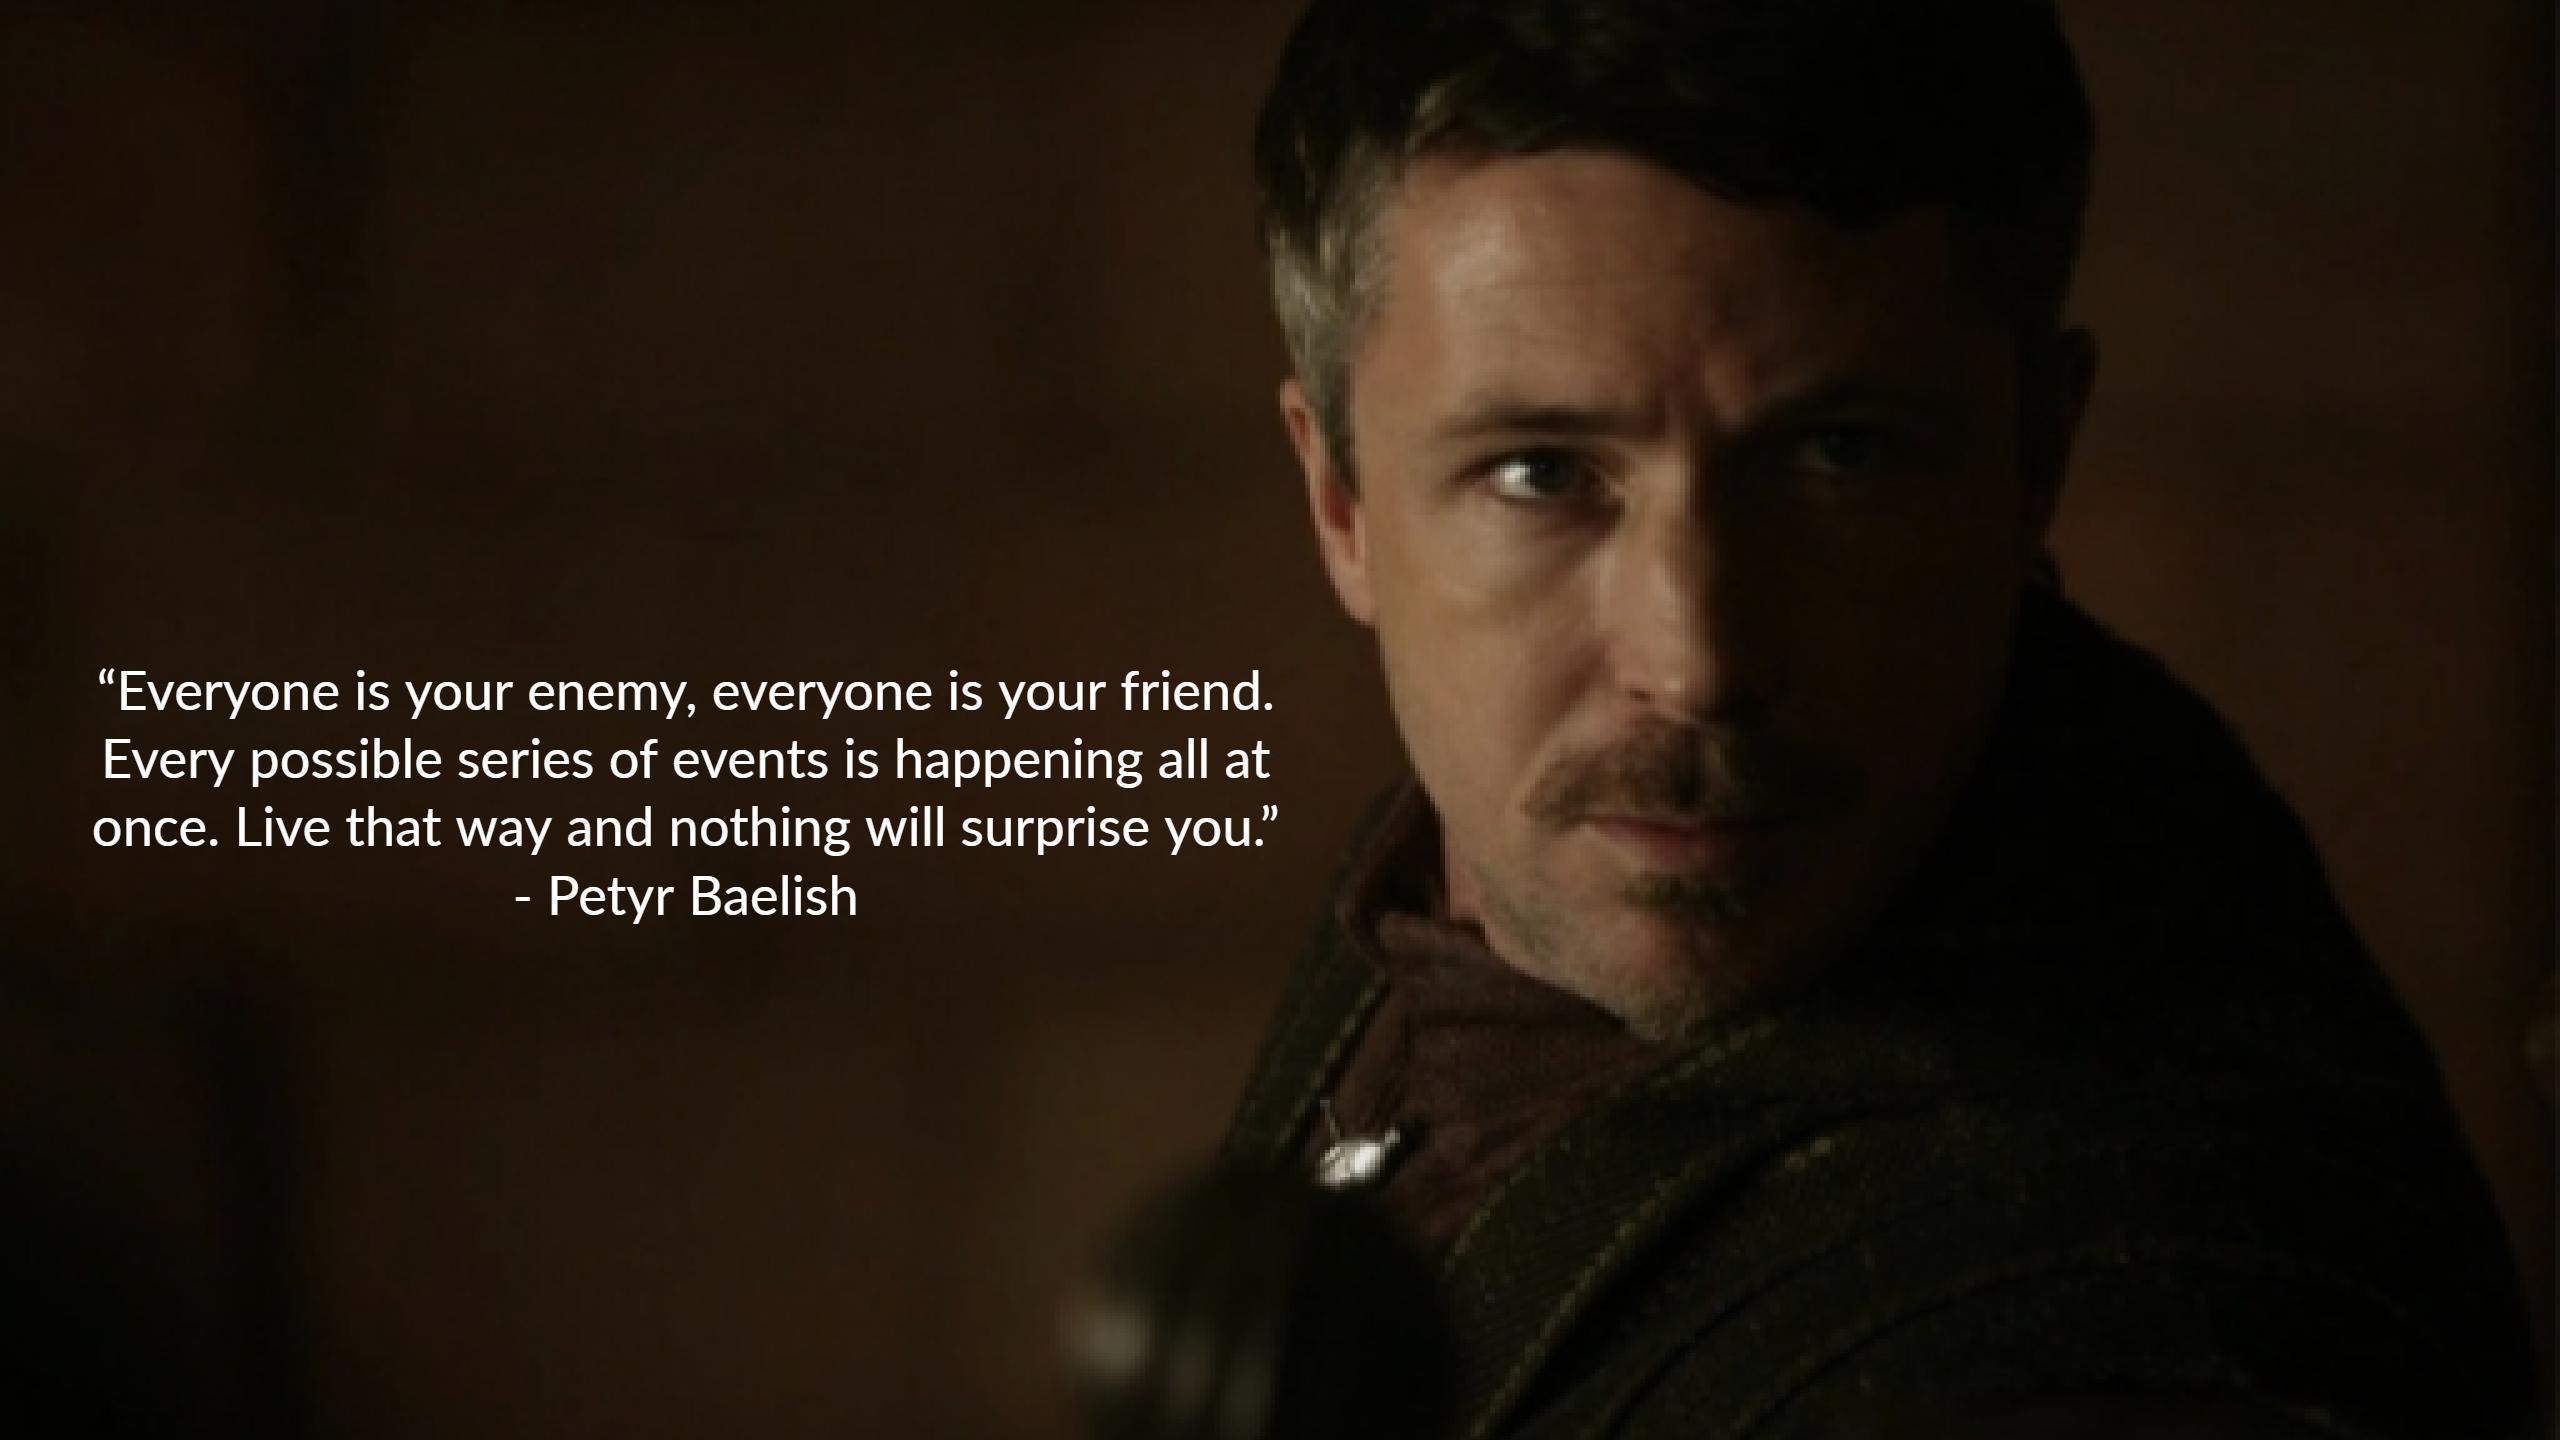 Littlefinger: opportunistic, manipulative and knowledgeable